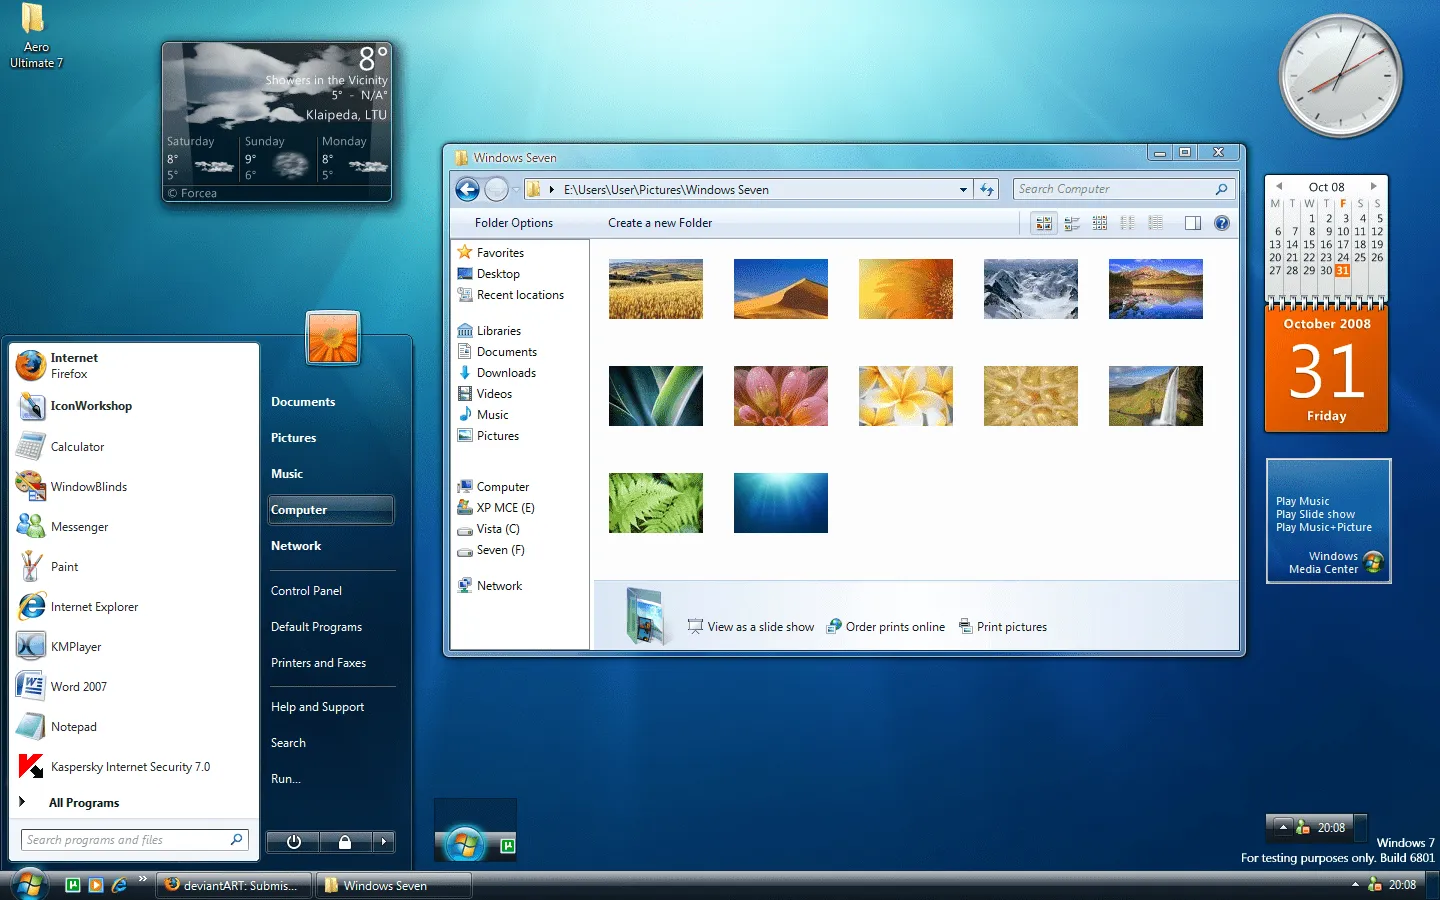 Windows 7 Ultimate Free Download ISO 32 and 64 Bit